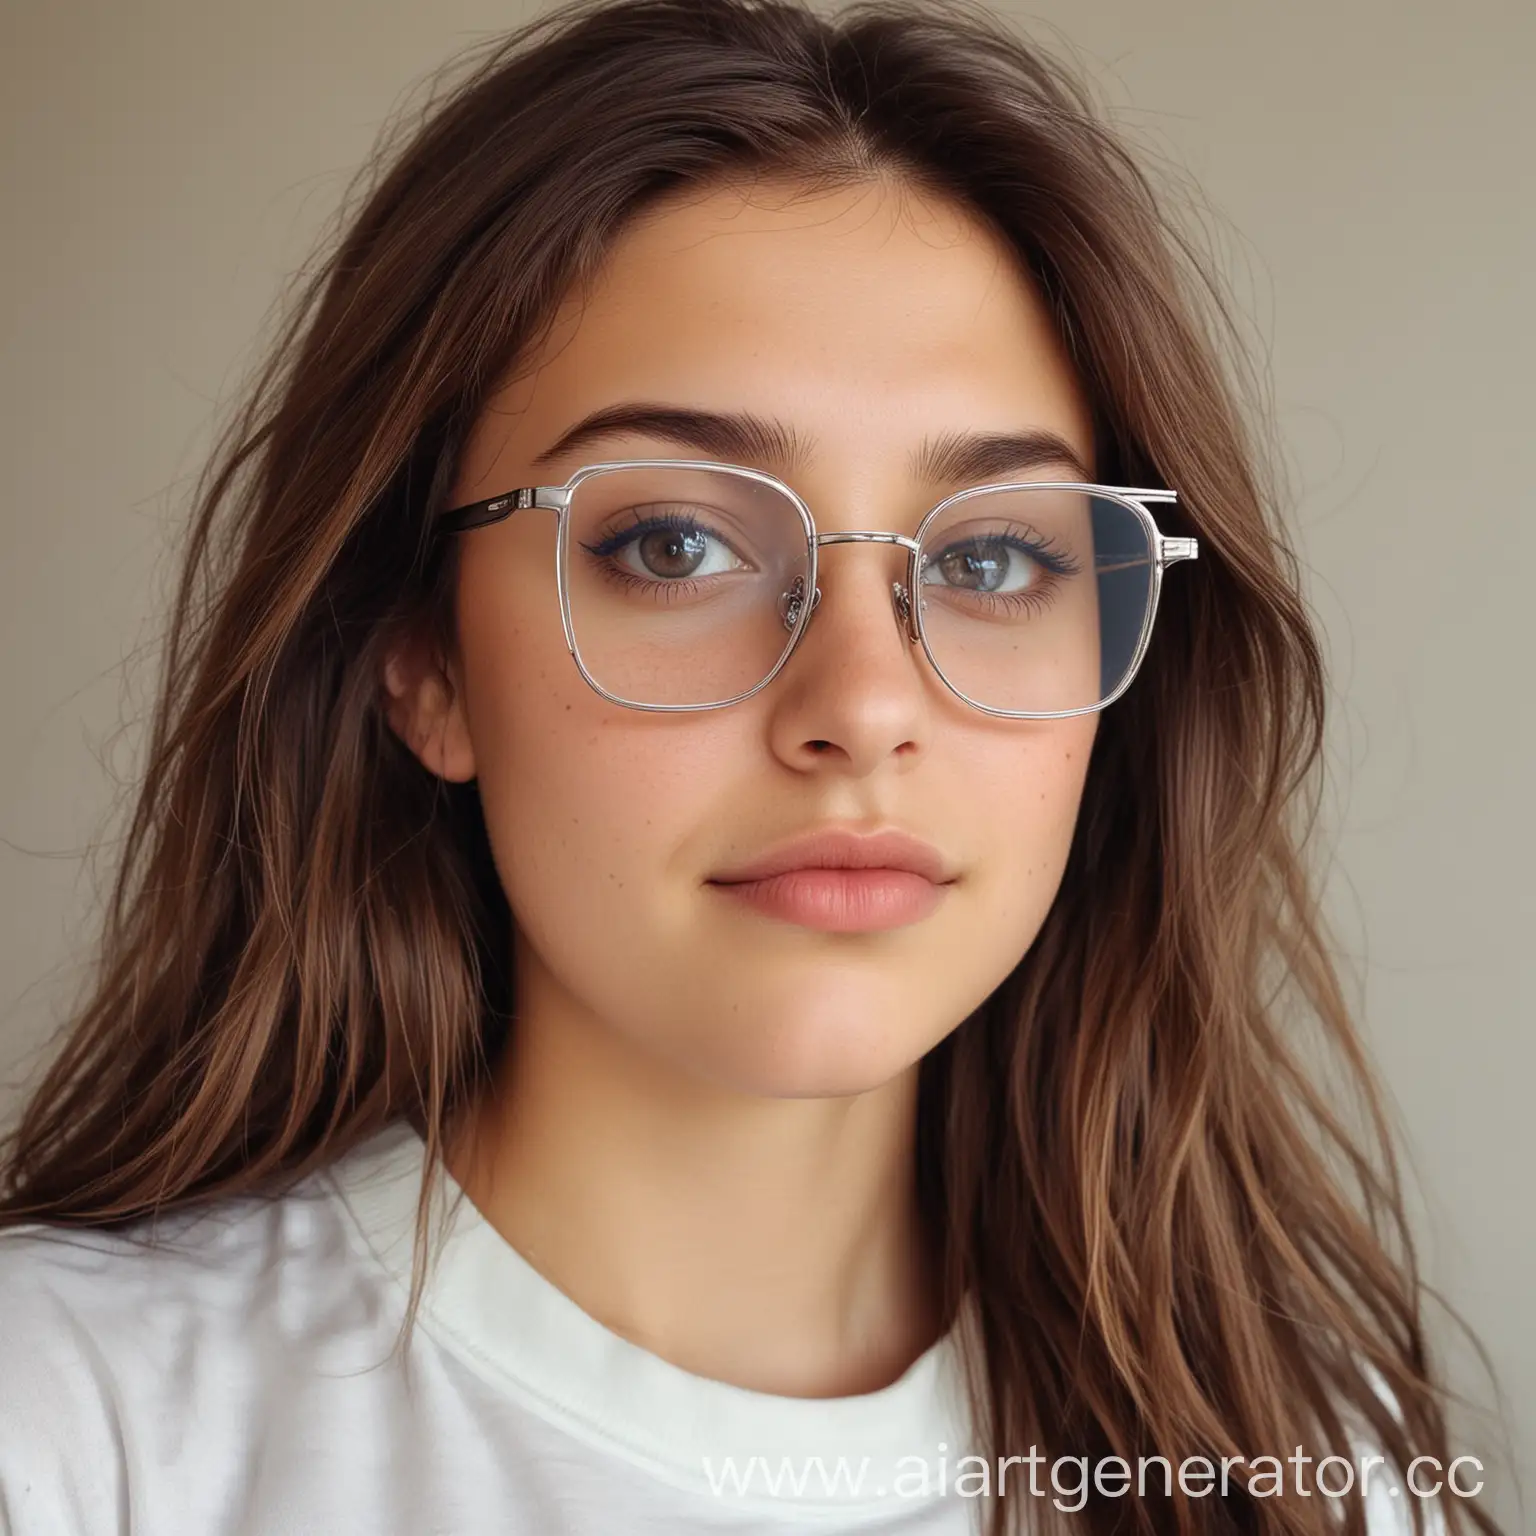 Young-Caucasian-Girl-with-Long-Brown-Hair-Glasses-and-Unique-Facial-Features